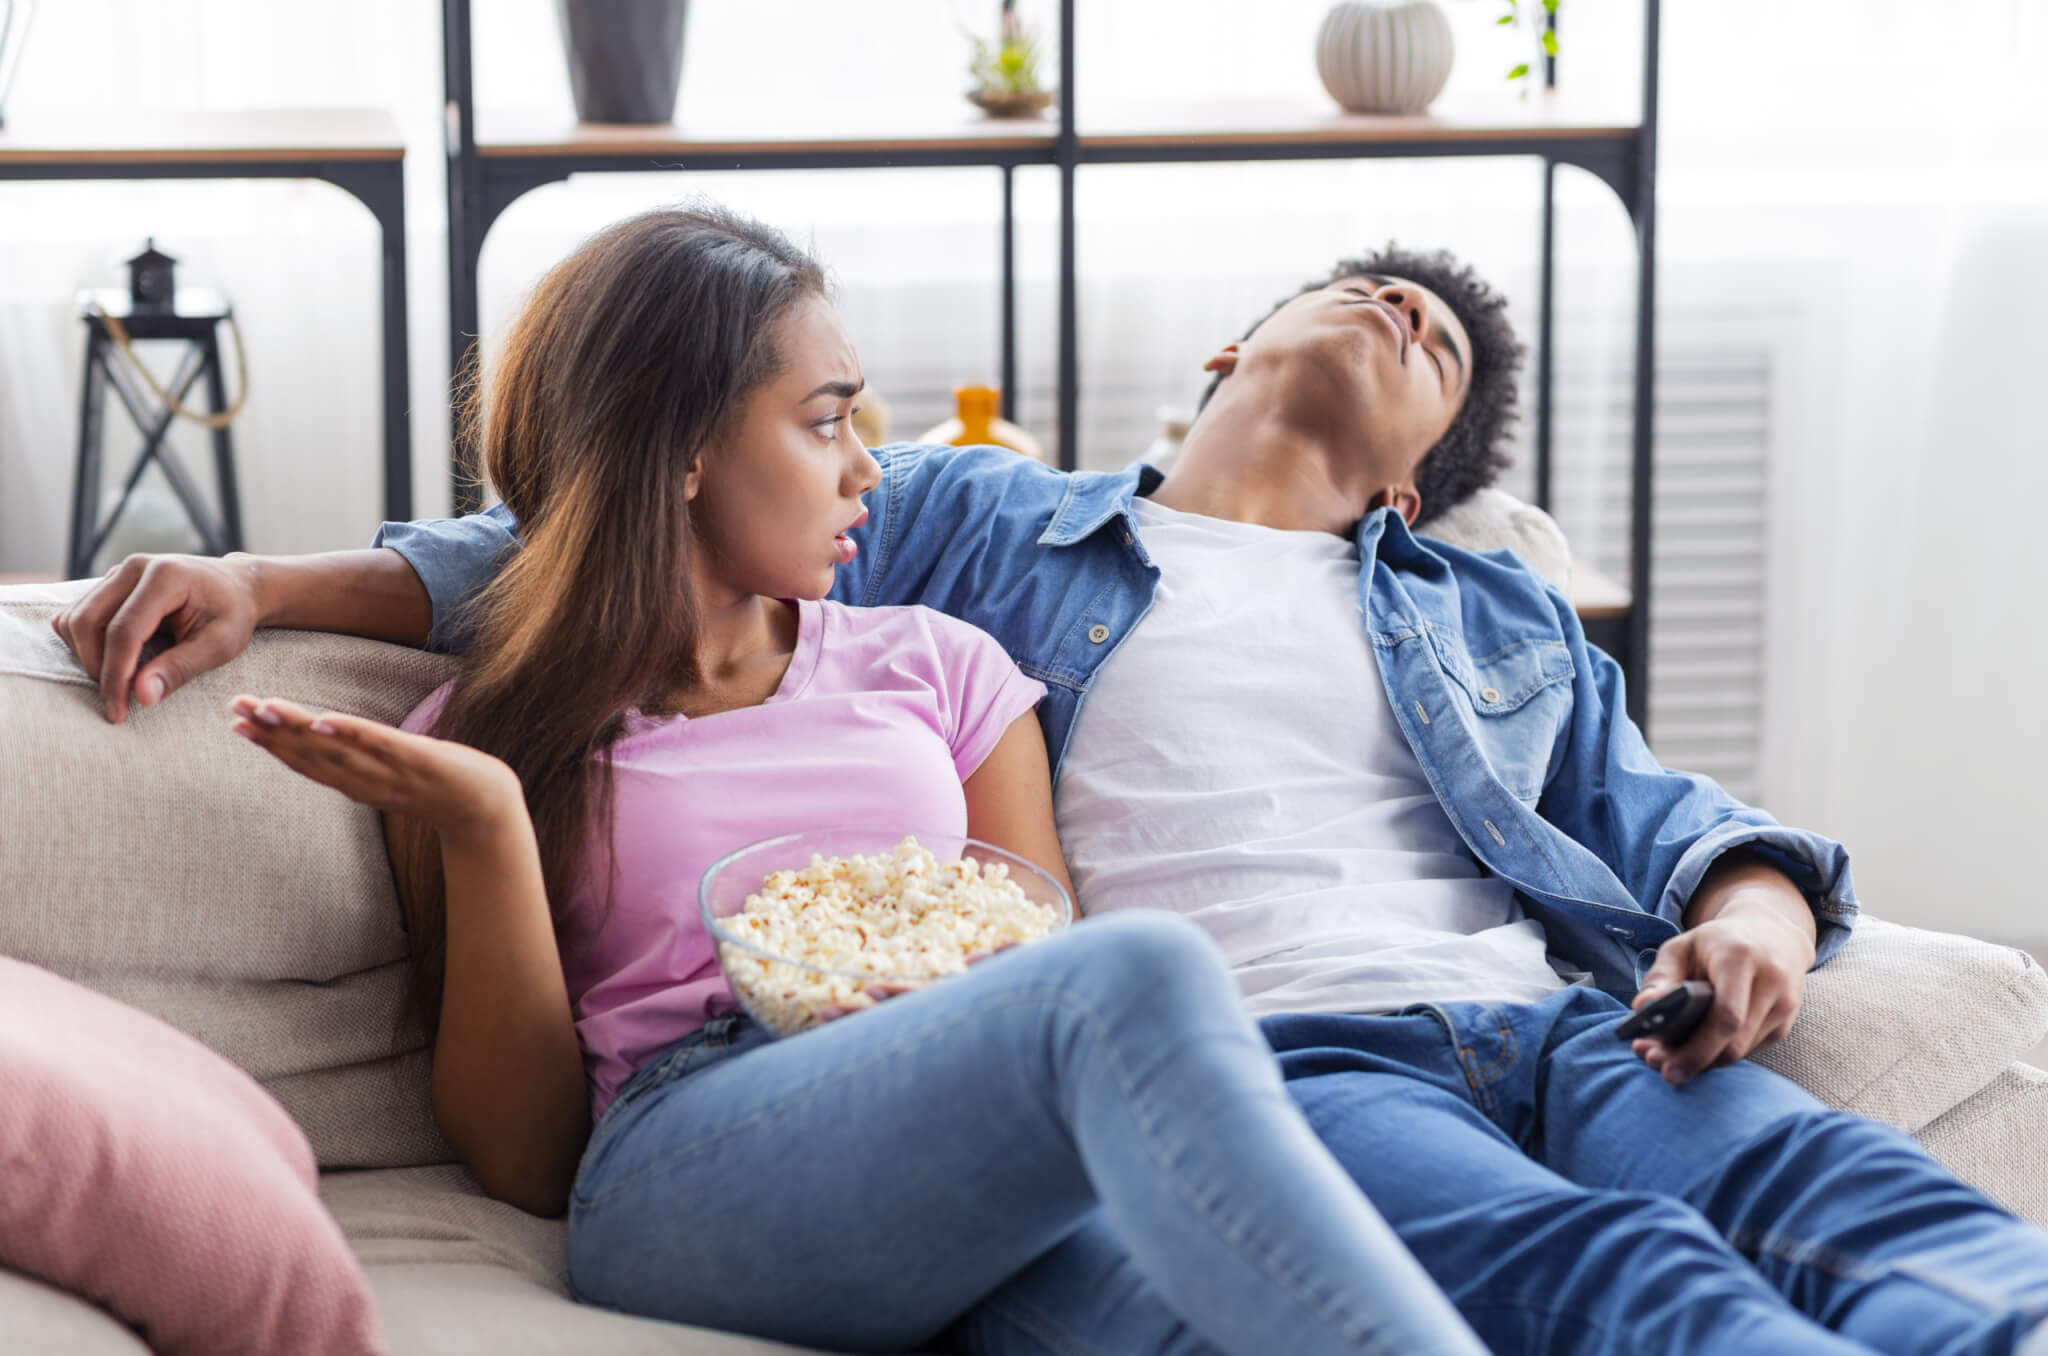 Girlfriend or wife upset with bored partner watching a movie